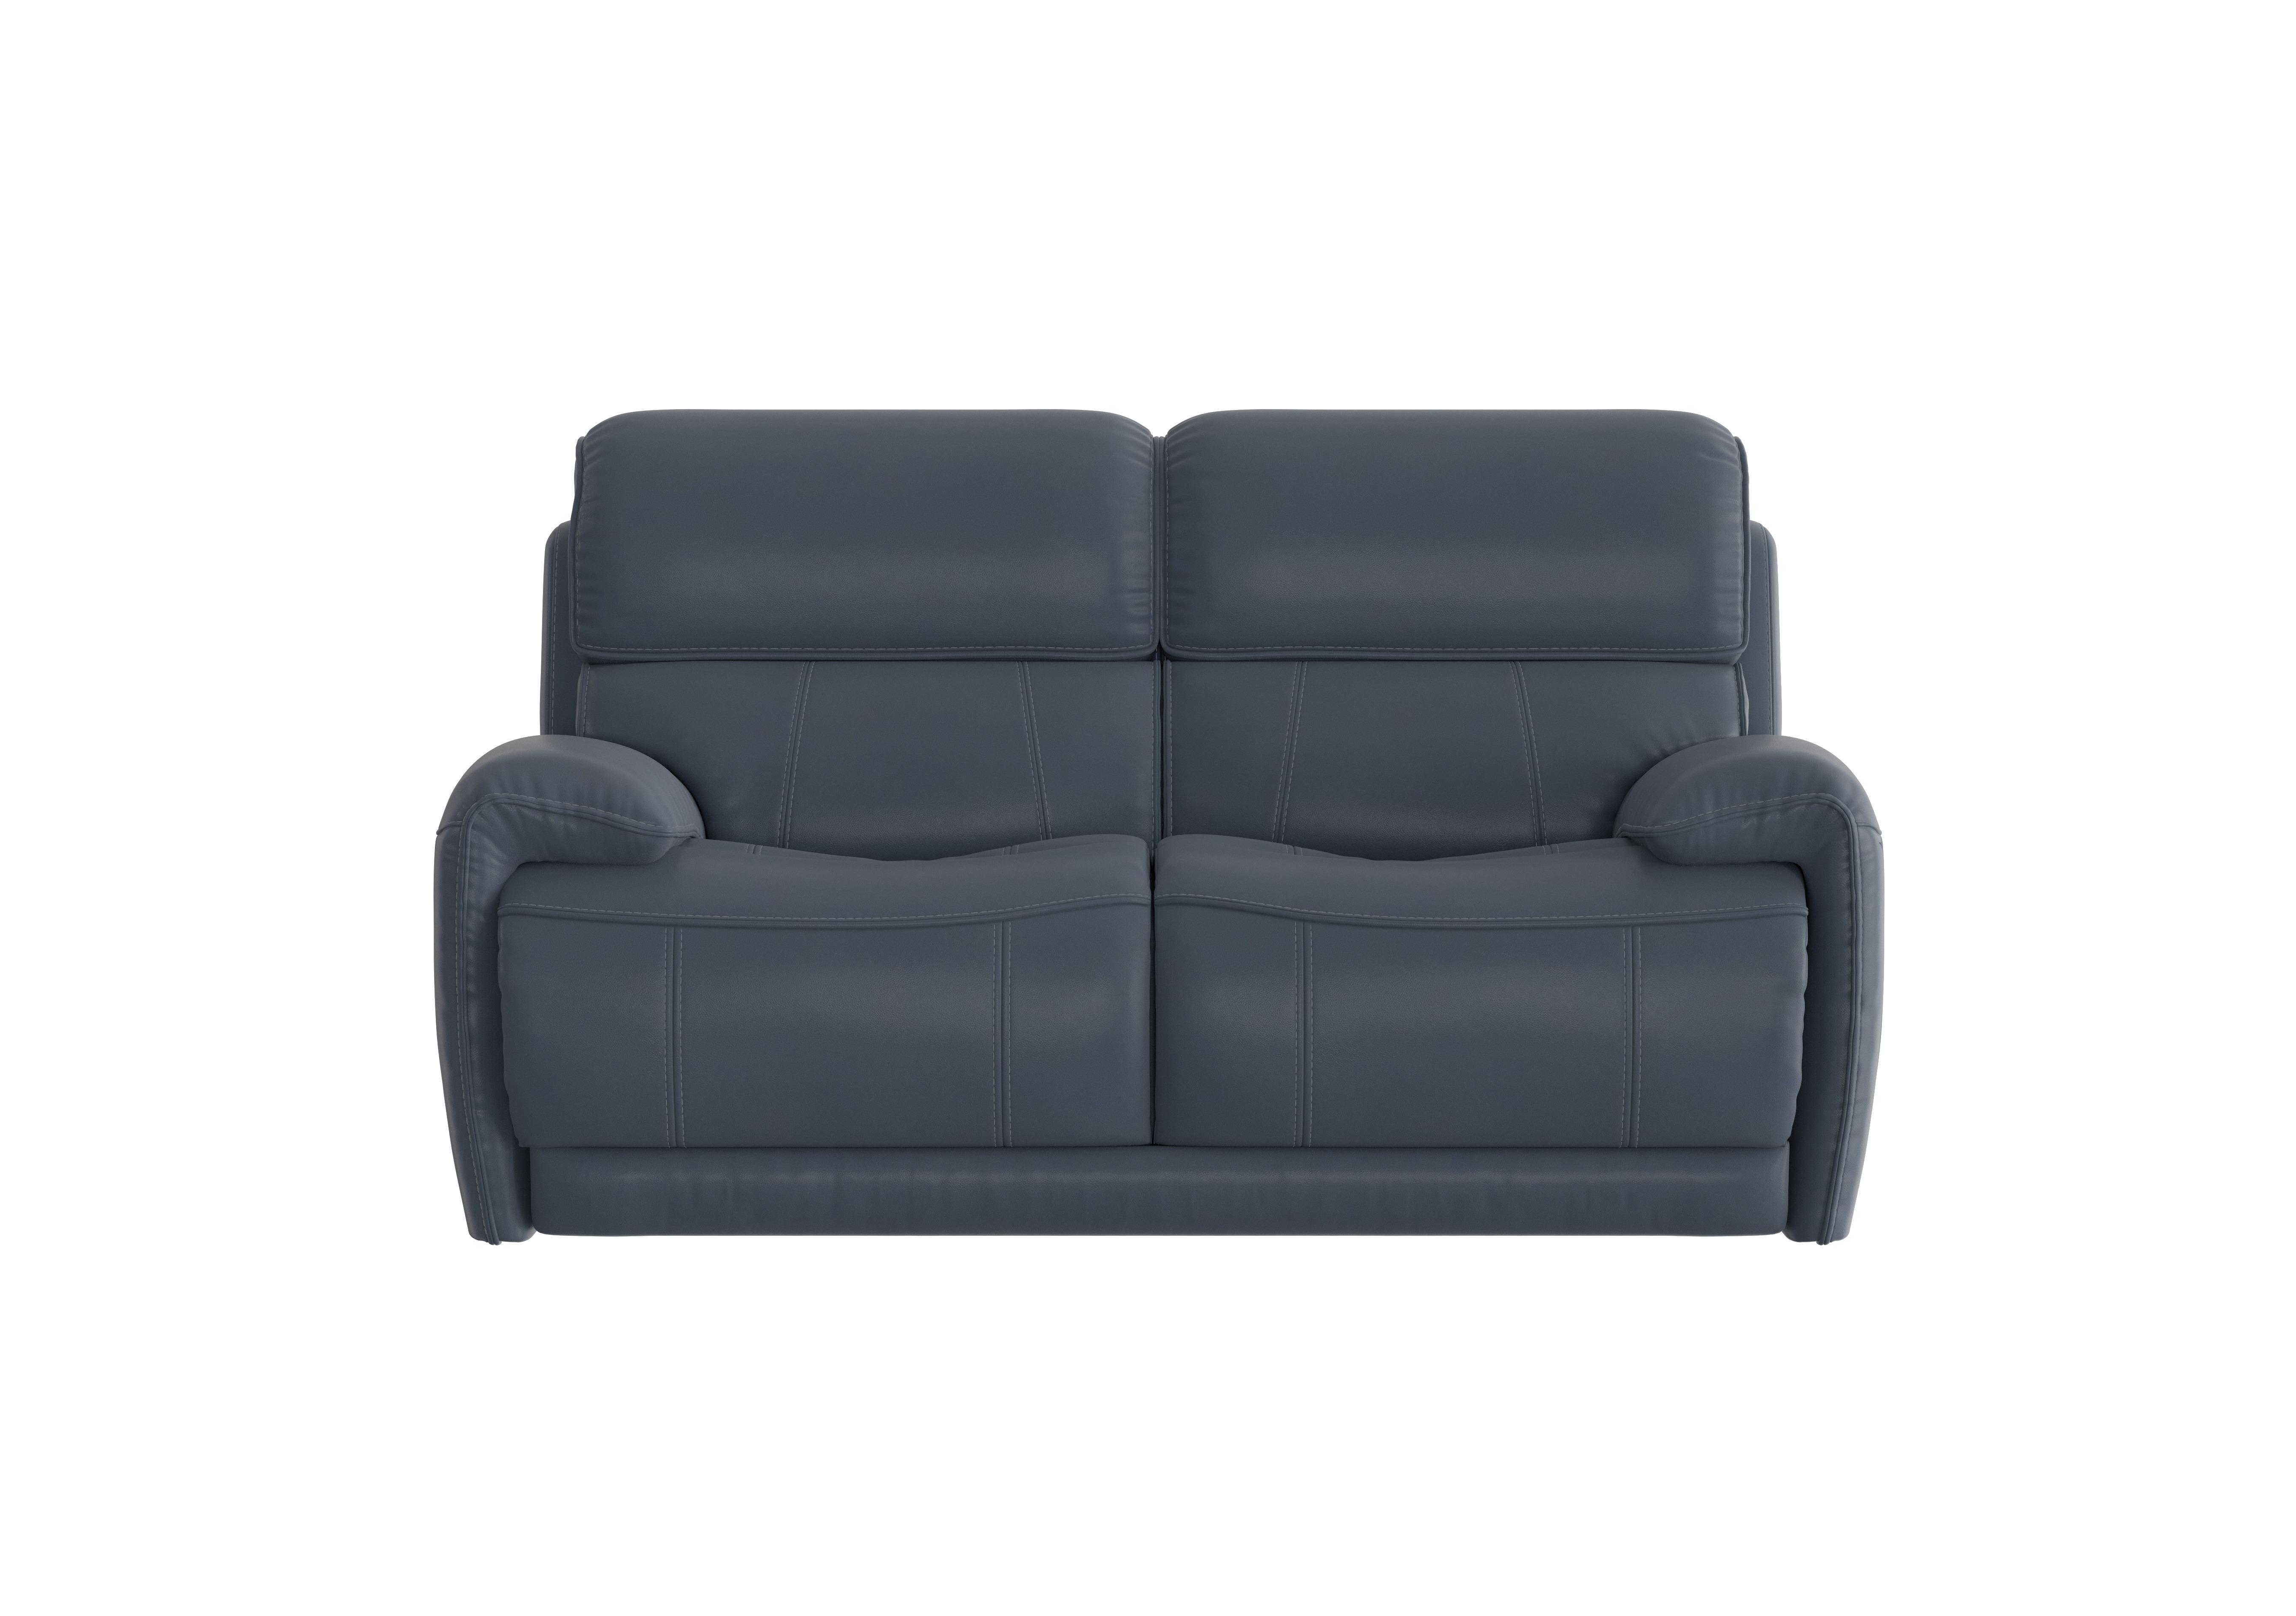 Link 2 Seater Leather Sofa in Bv-313e Ocean Blue on Furniture Village